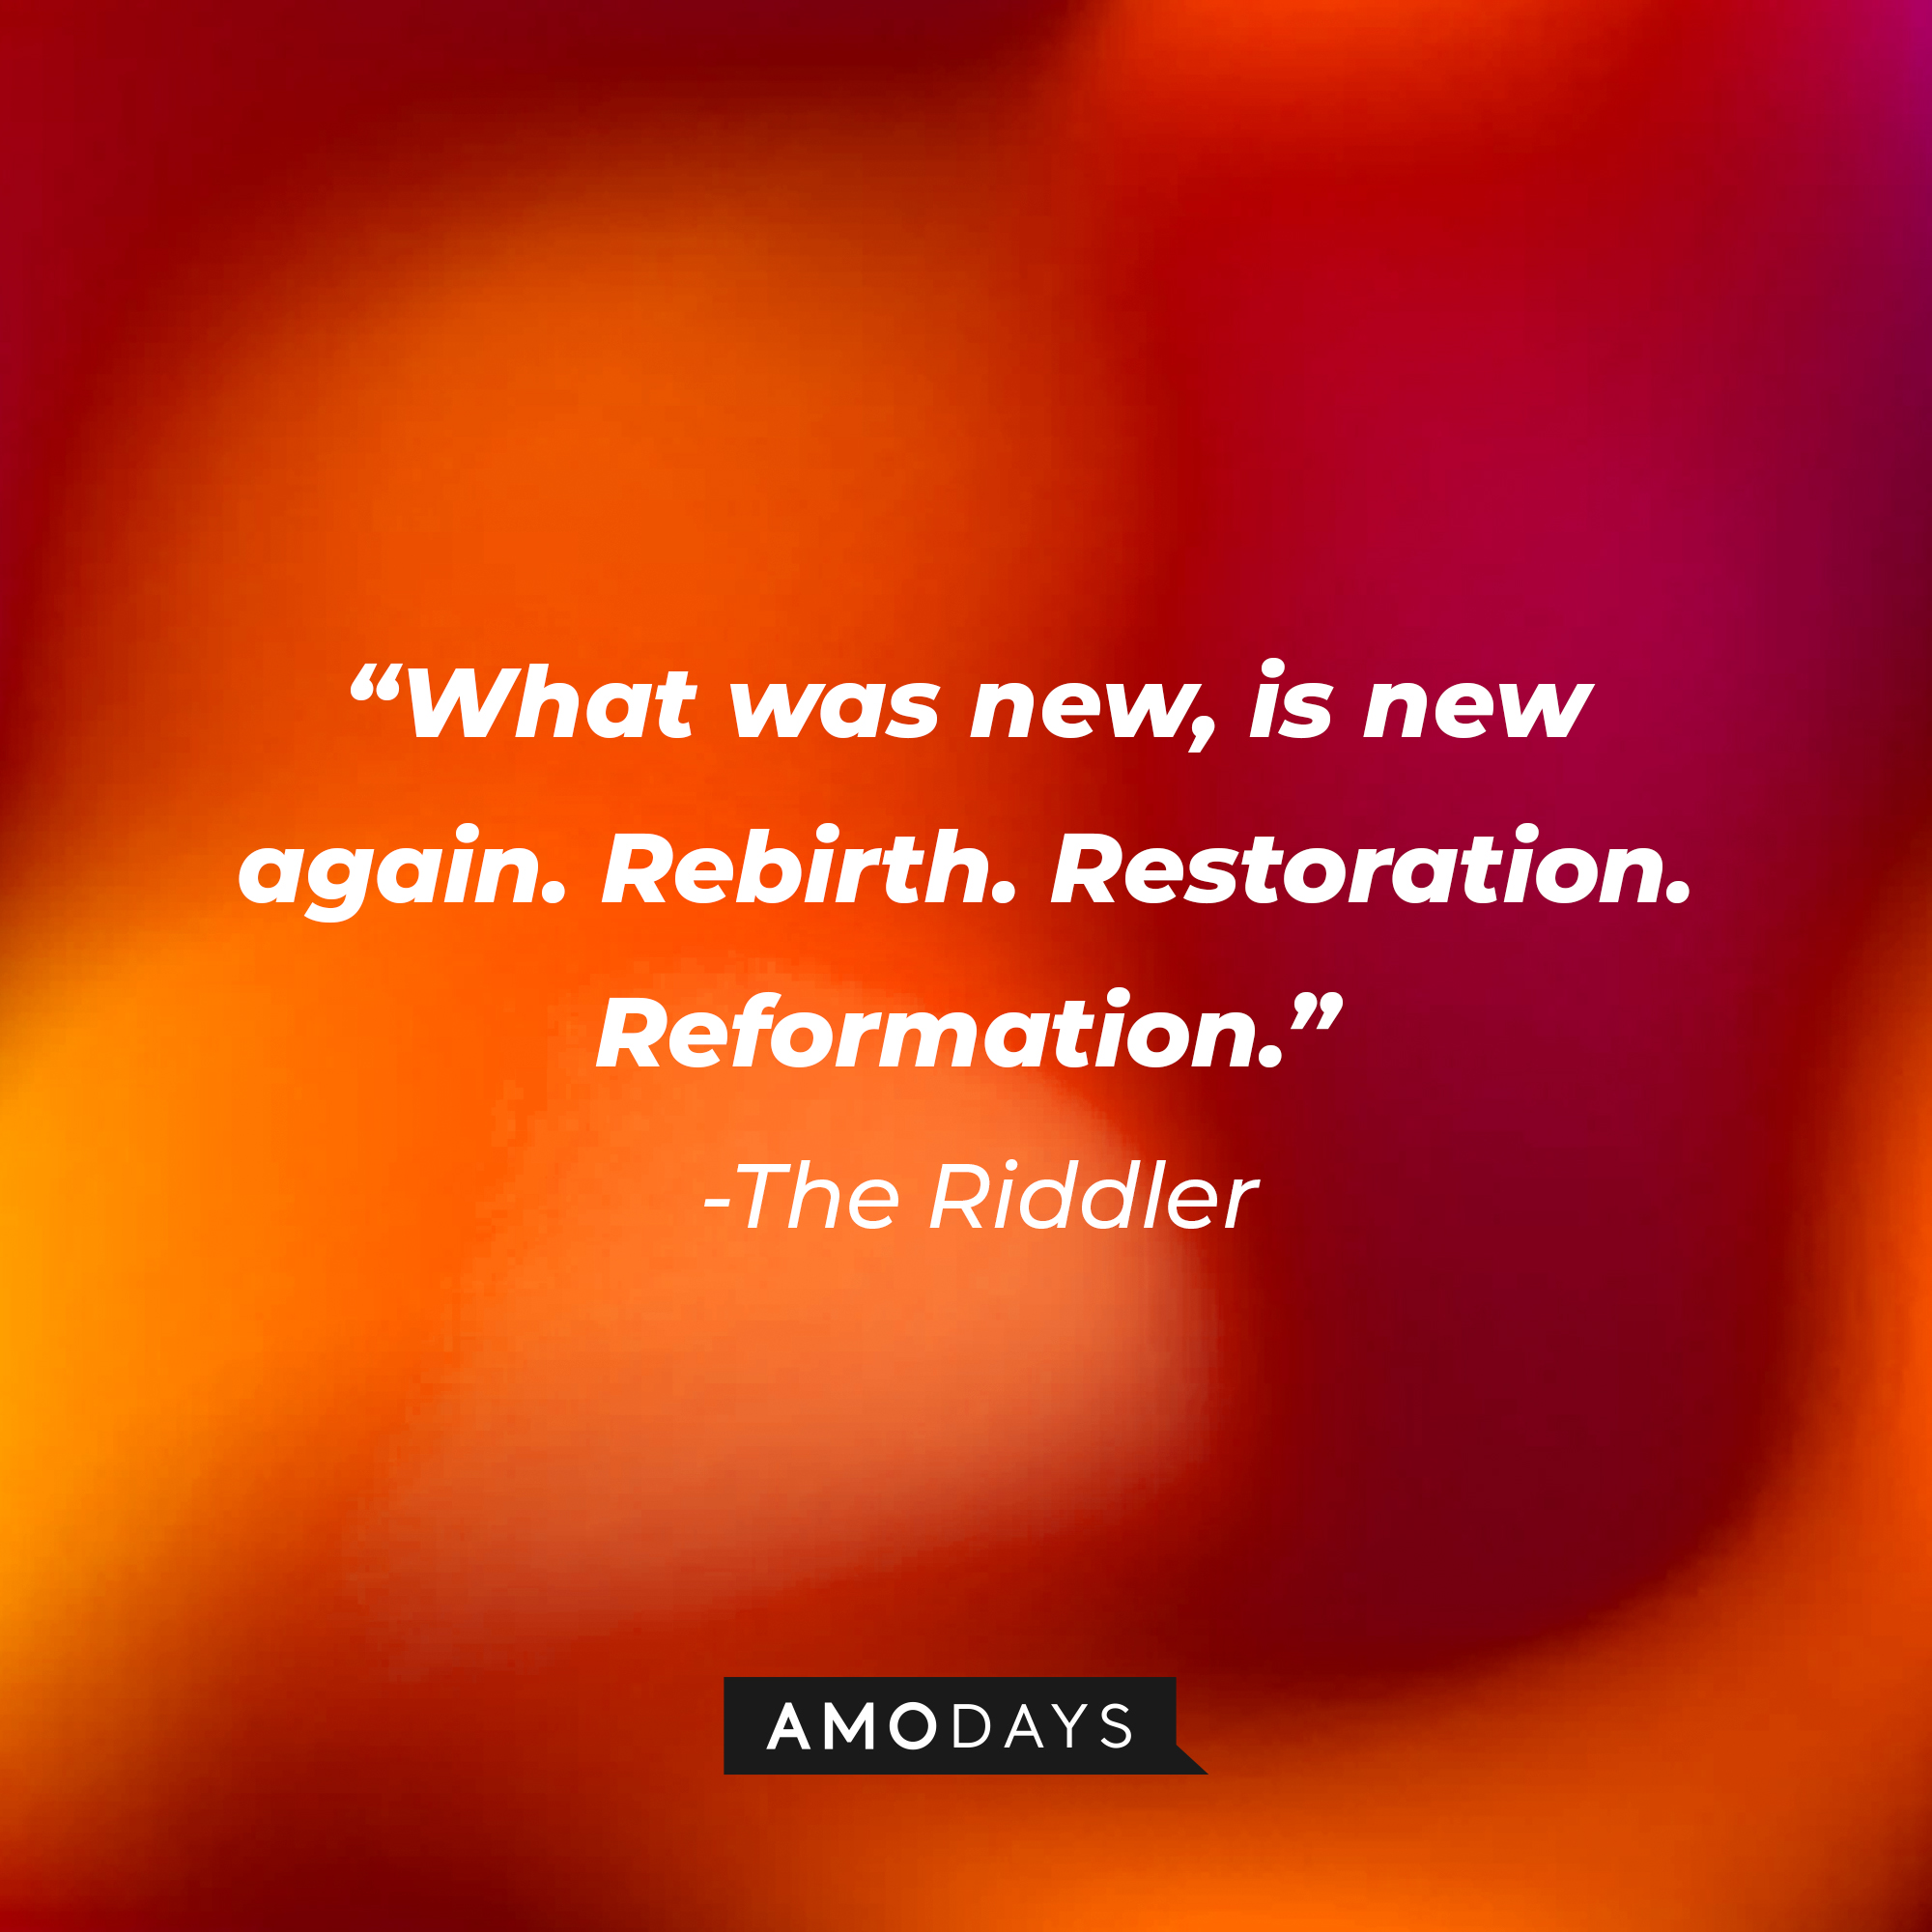 The Riddler's quote: “What was new, is new again. Rebirth. Restoration. Reformation.” | Amodays